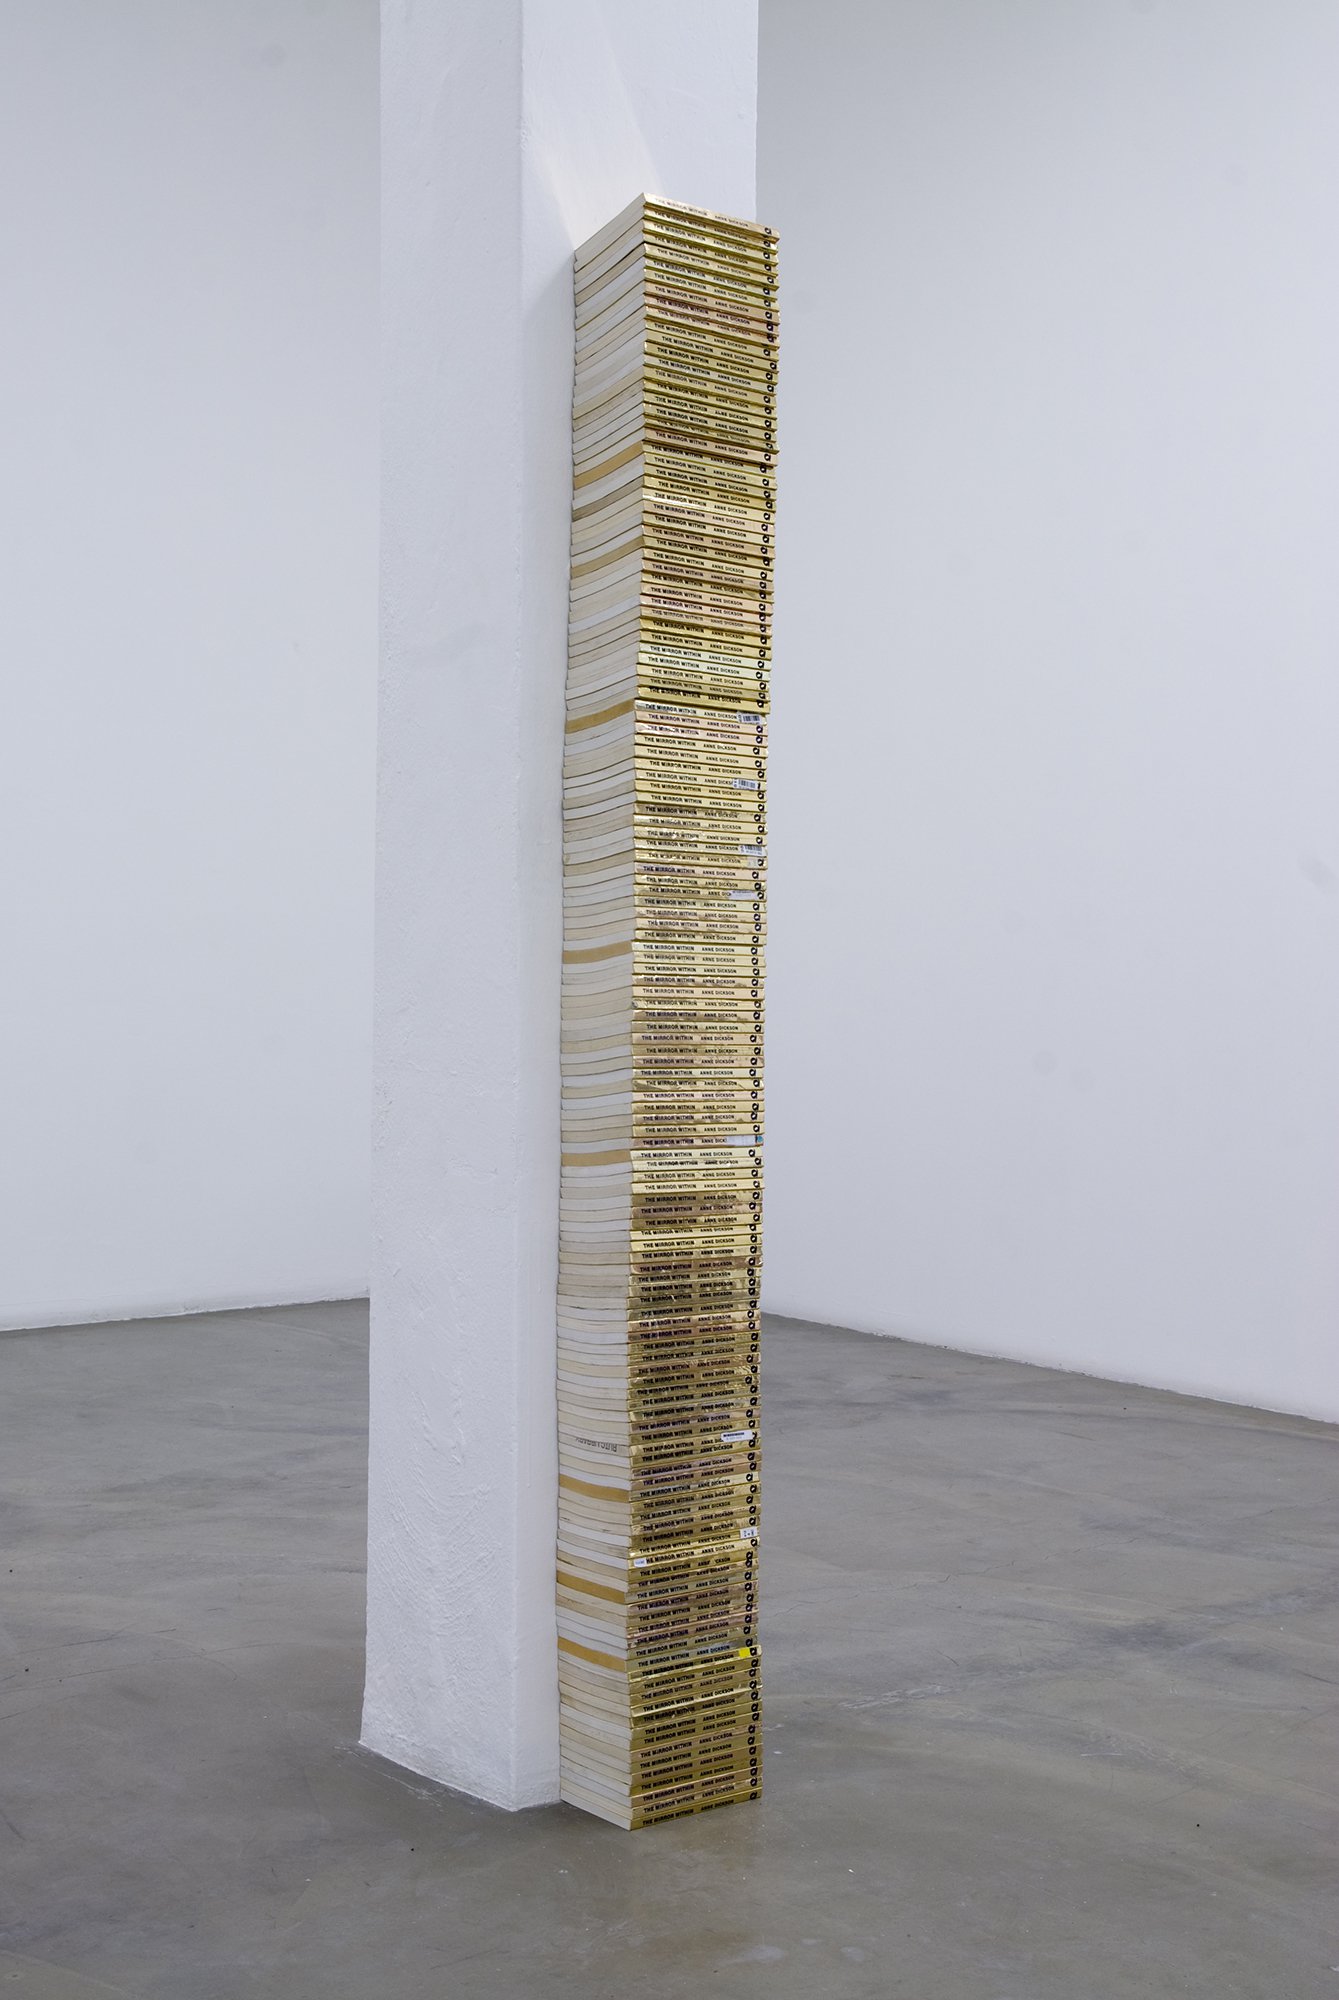 James Richards, Untitled (The Mirror Within), stacked second hand books, 180 x 19,5 × 13 cm (70 7/8 x 7 5/8 x 5 1/8 in), 2010 – 2011. Installation view, James Richards, Rodeo, Istanbul, 2011